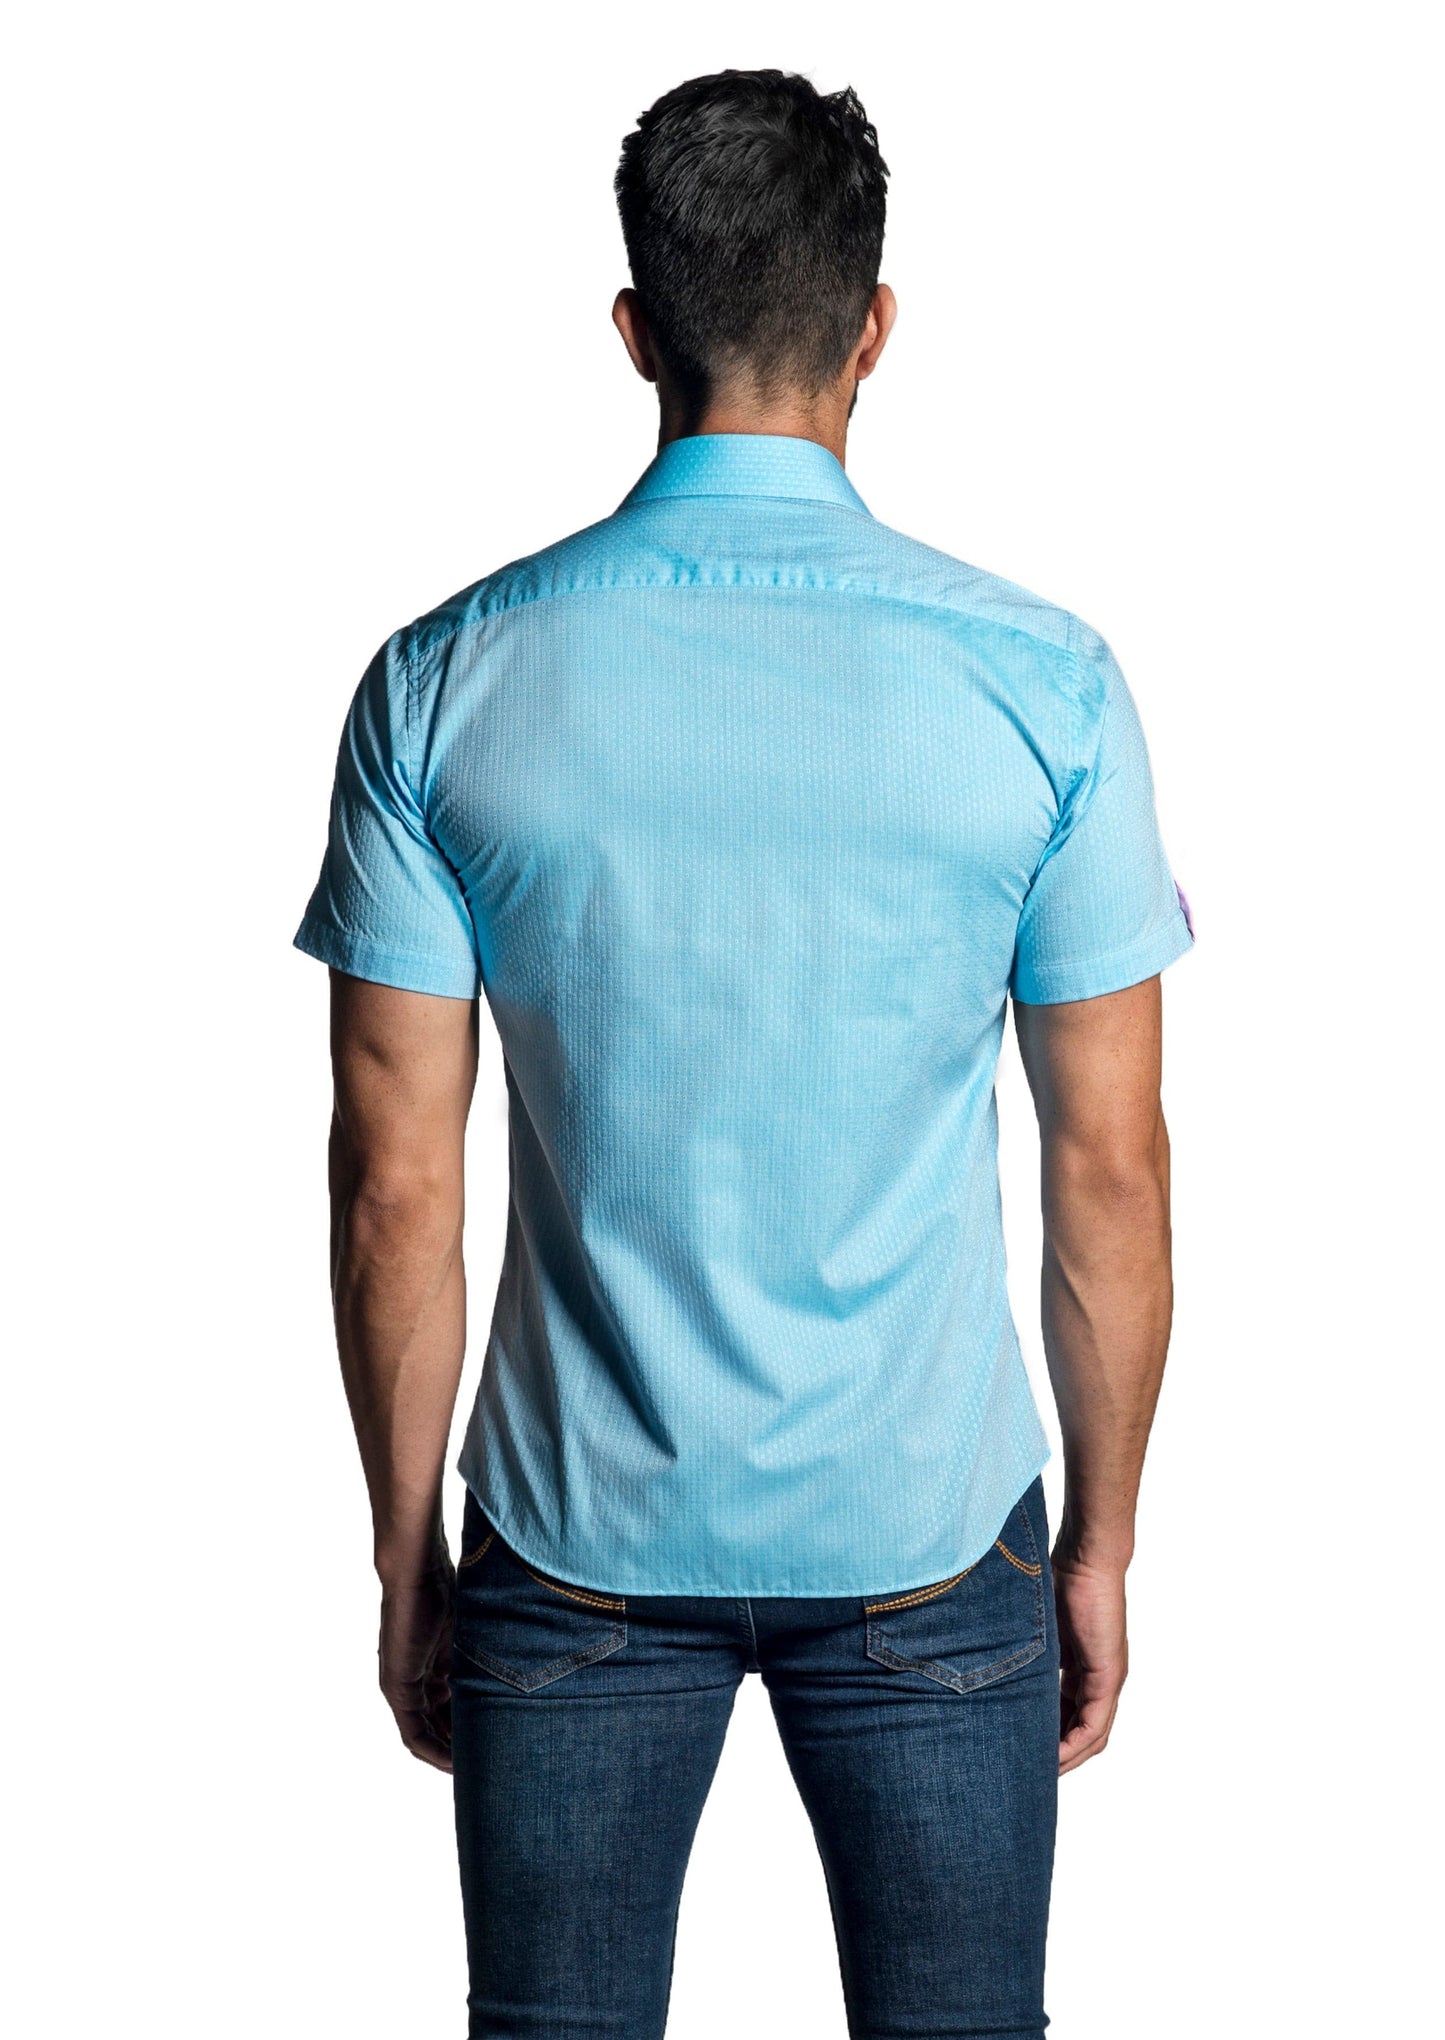 Turquoise Short Sleeve Shirt T-6655SS - Back - Jared Lang